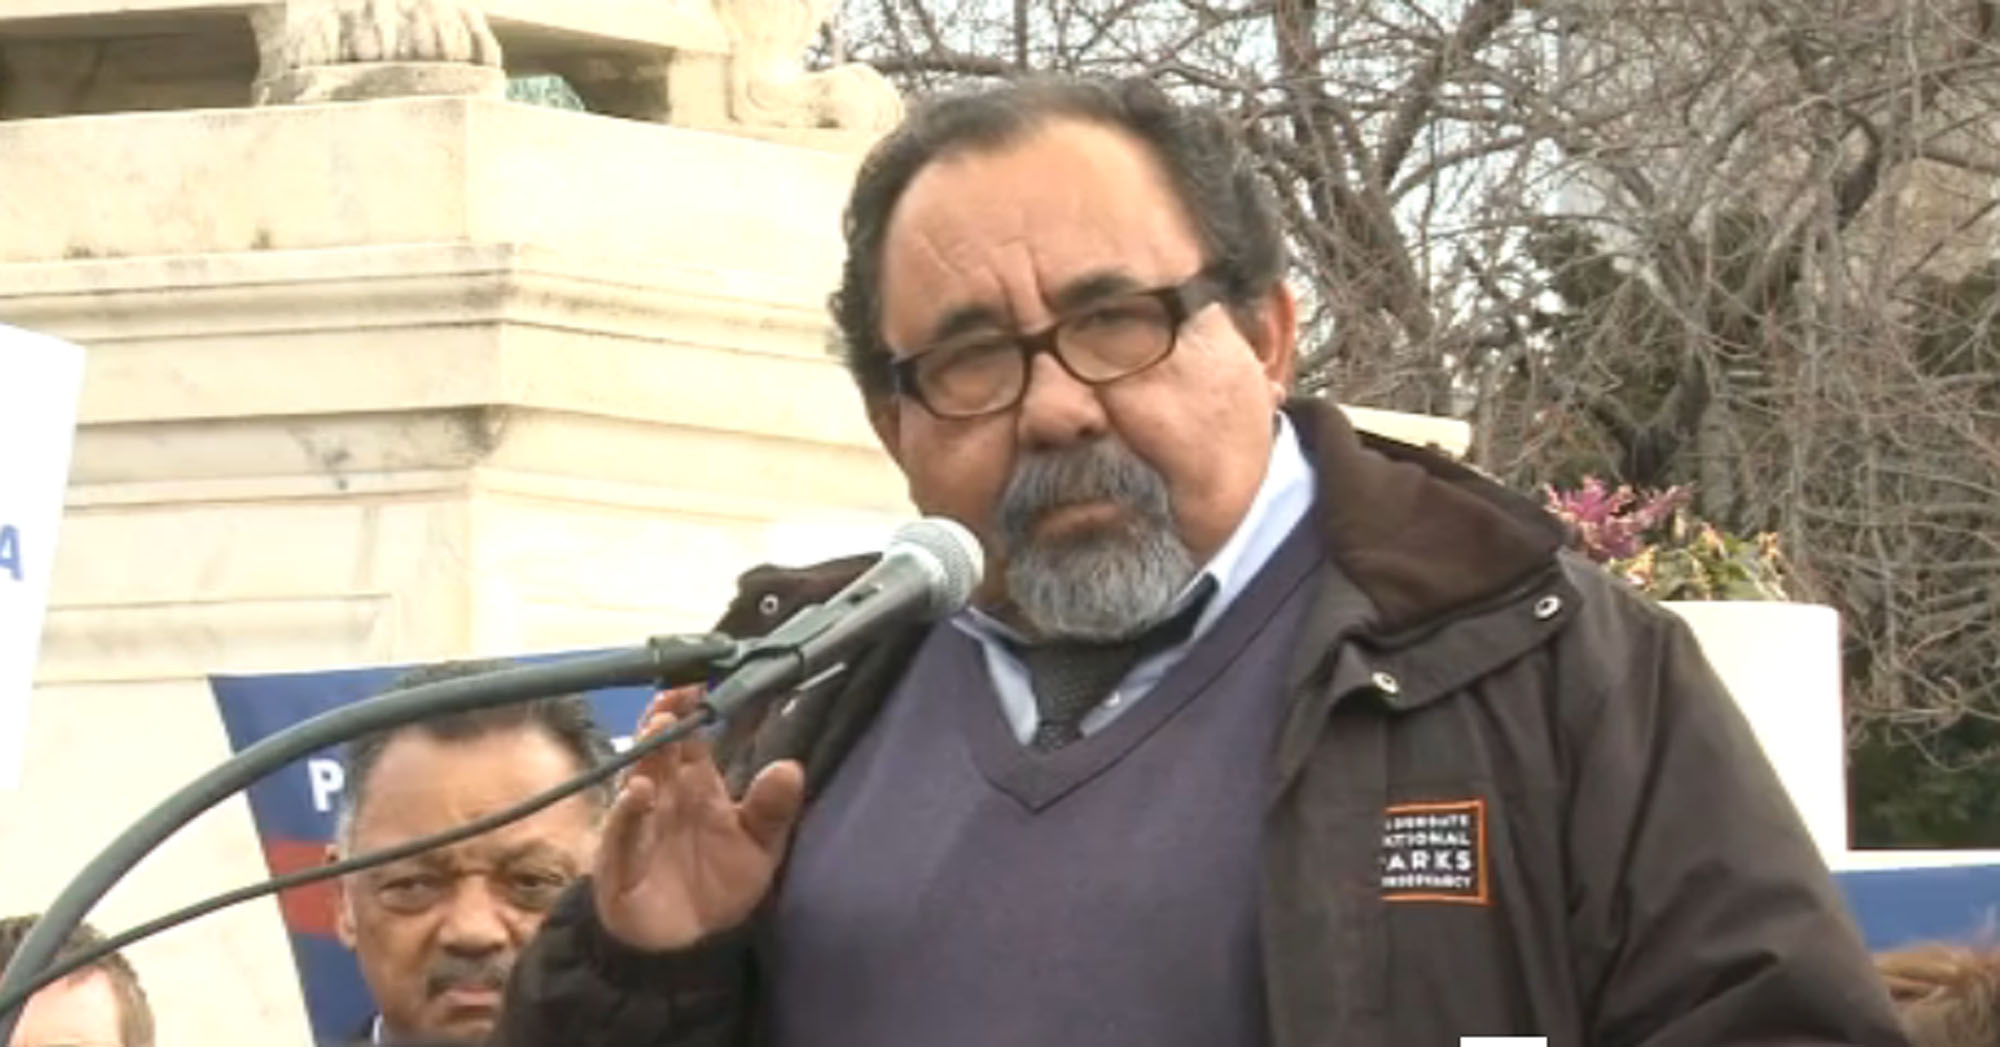 Rep. Raul Grijalva, D-Tucson, shown after the February arguments in Shelby v. Holder, when he said the country has not moved past the voting discrimination that the Voting Rights Act aims to prevent.